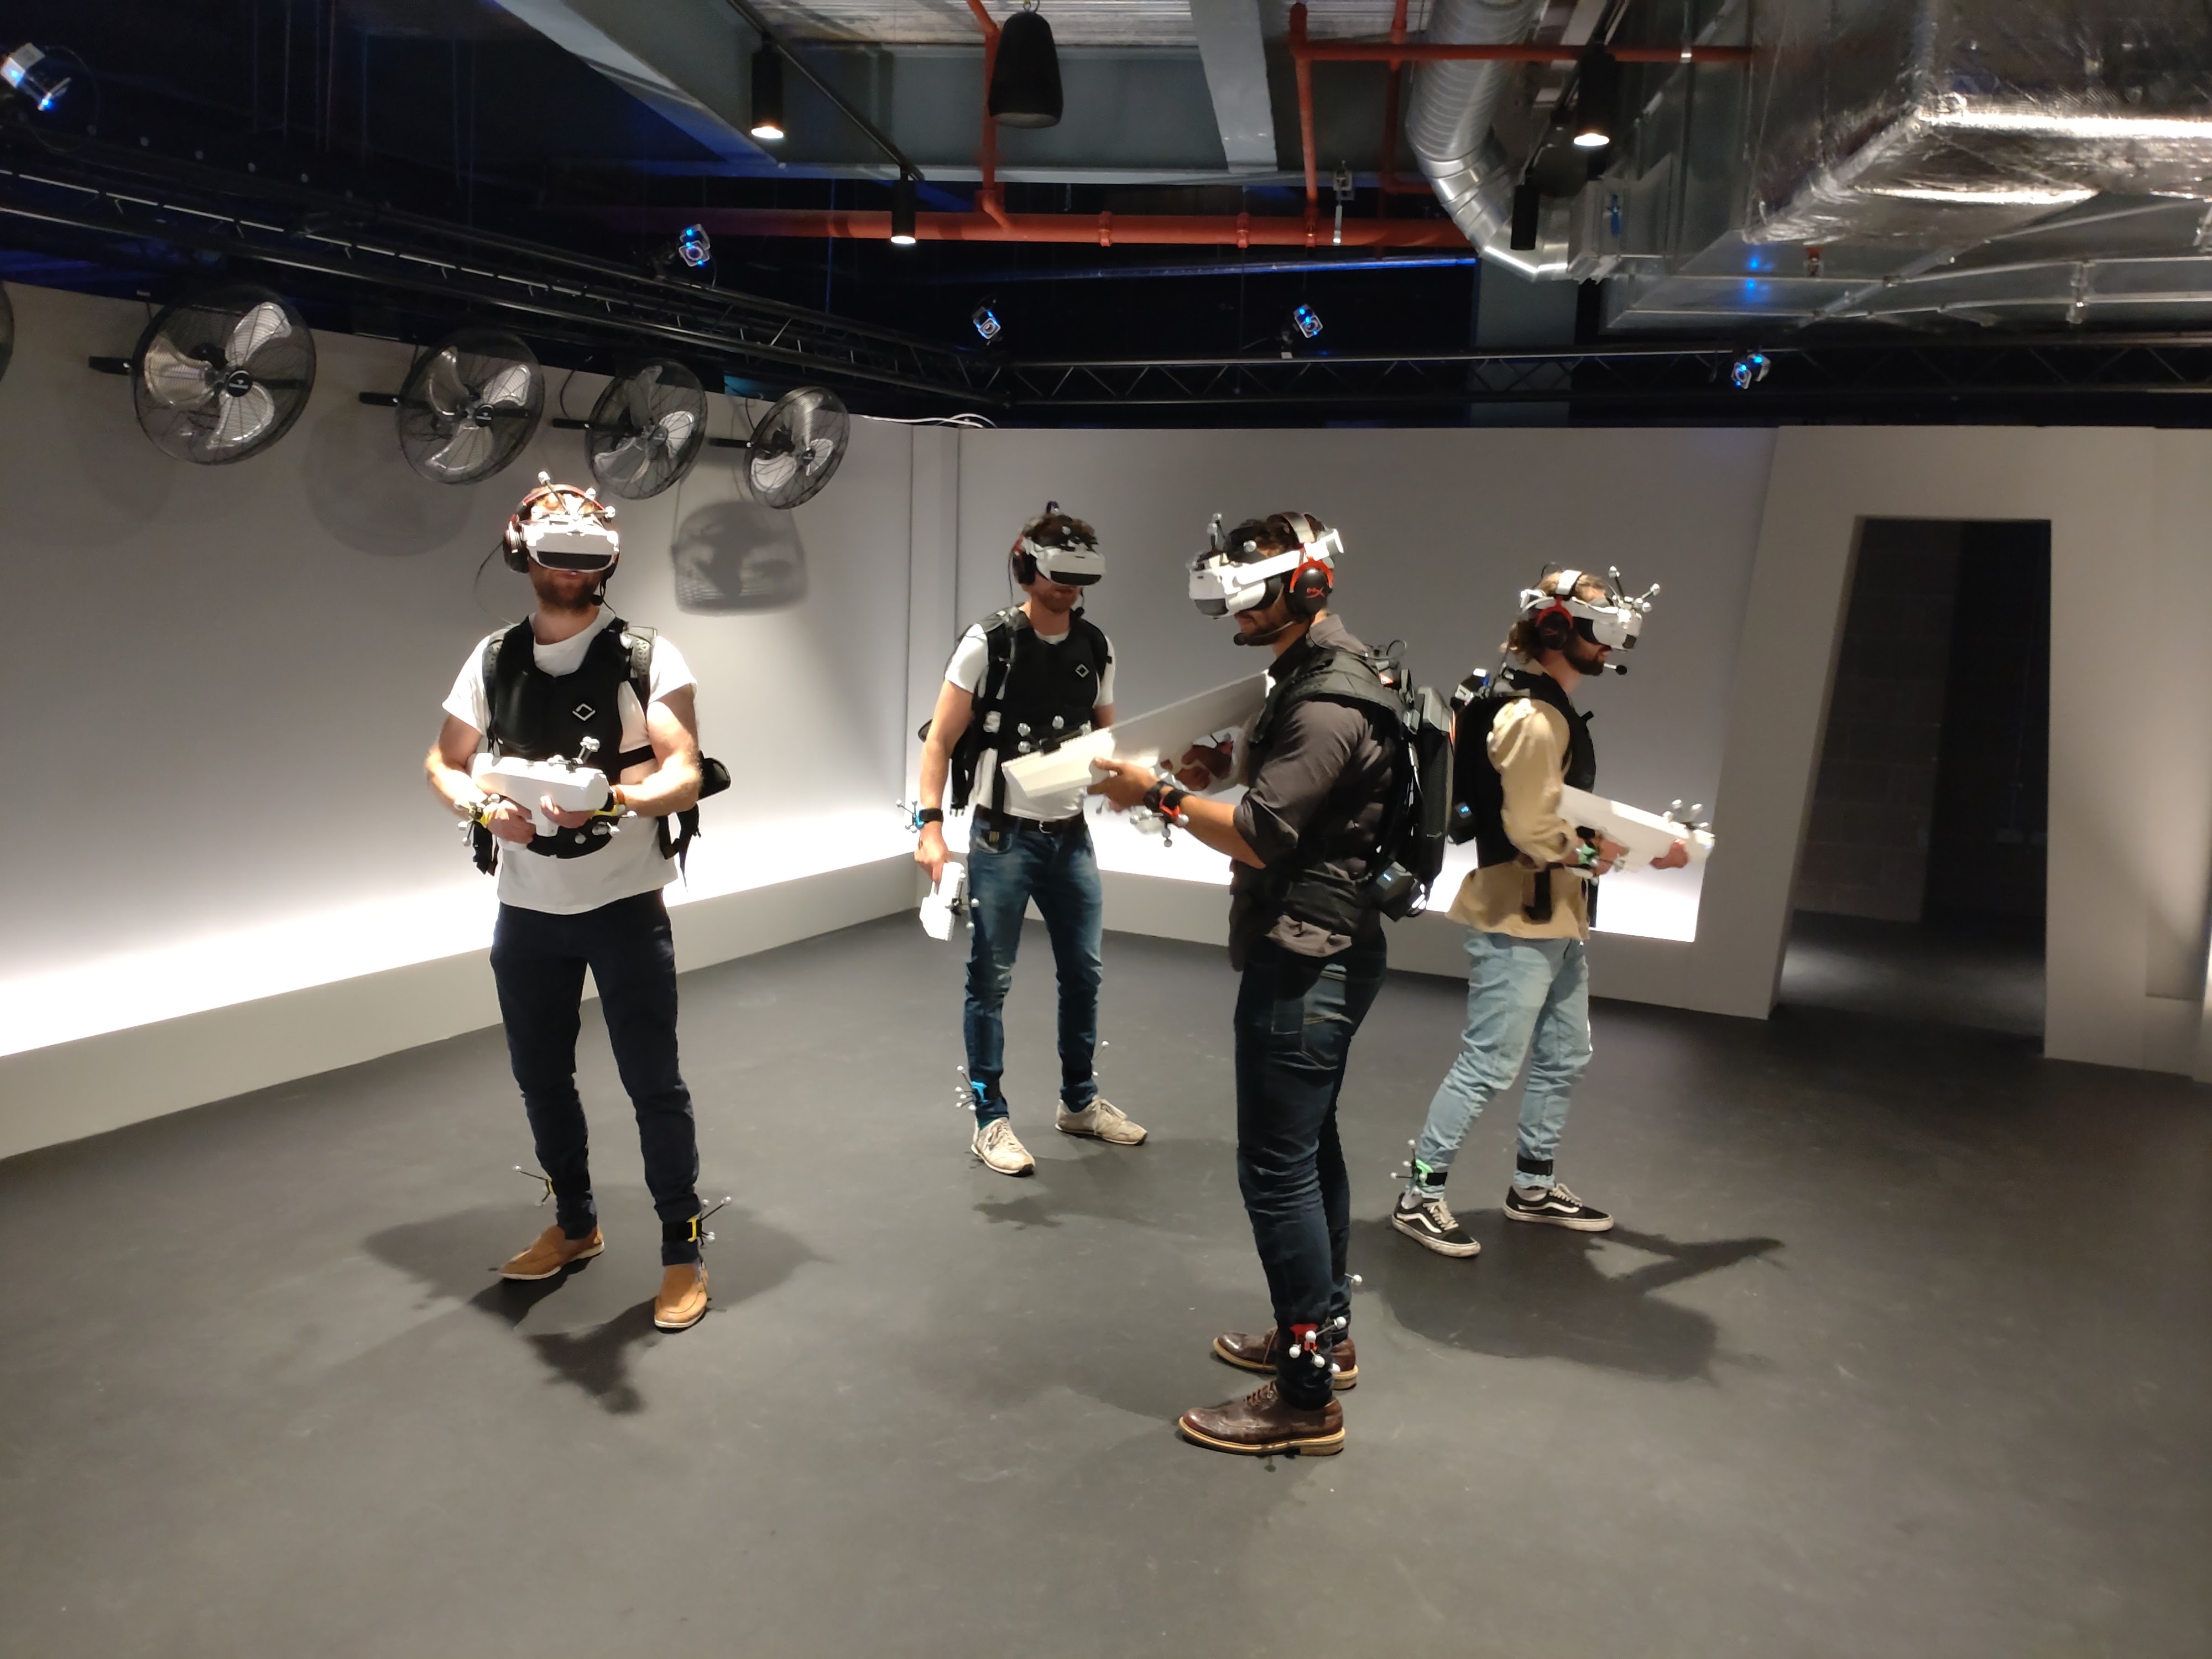 Arena: London's latest VR attractions